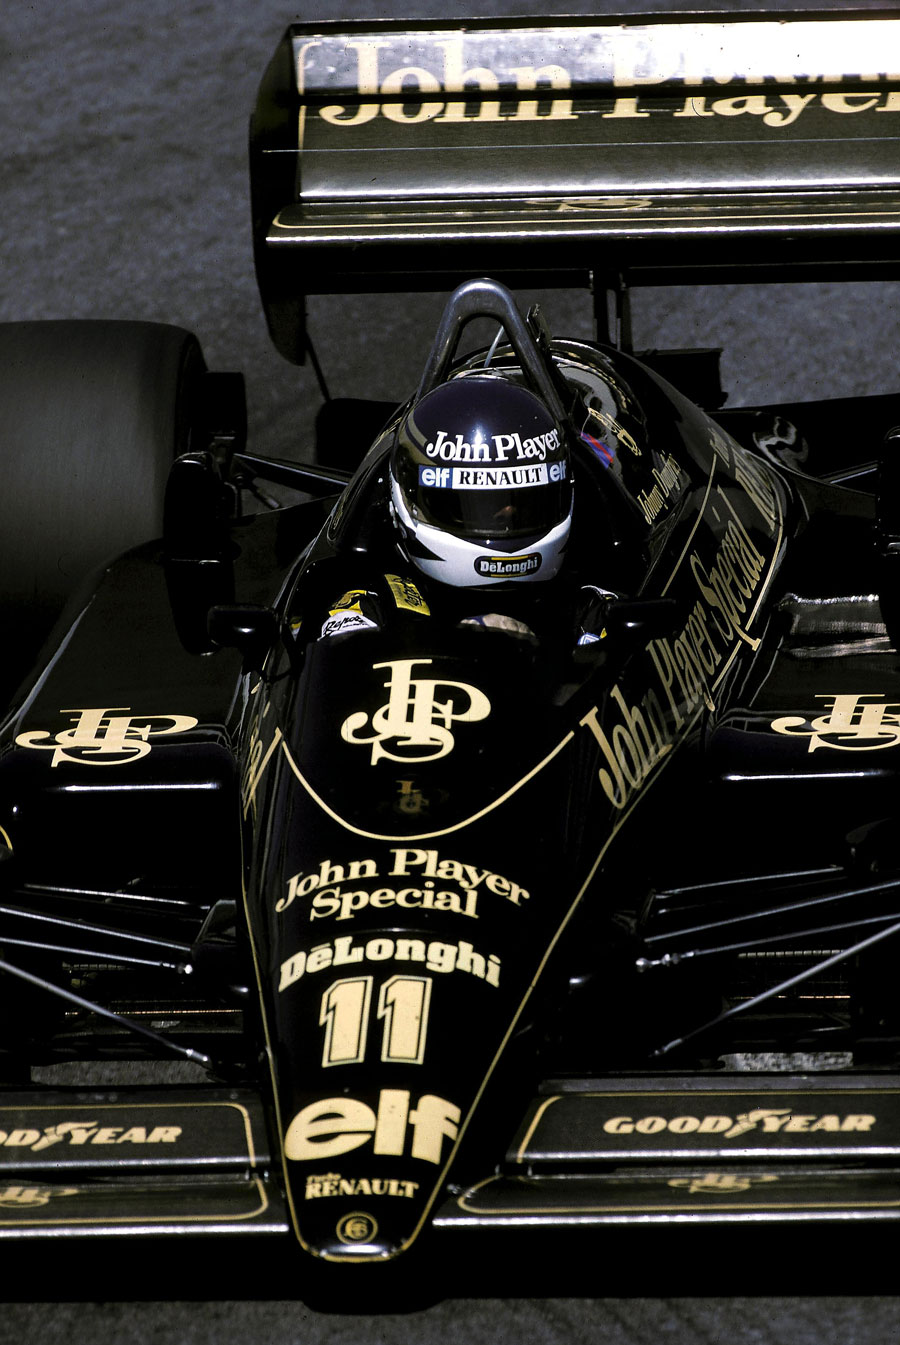 Johnny Dumfries on track in the Lotus 98T